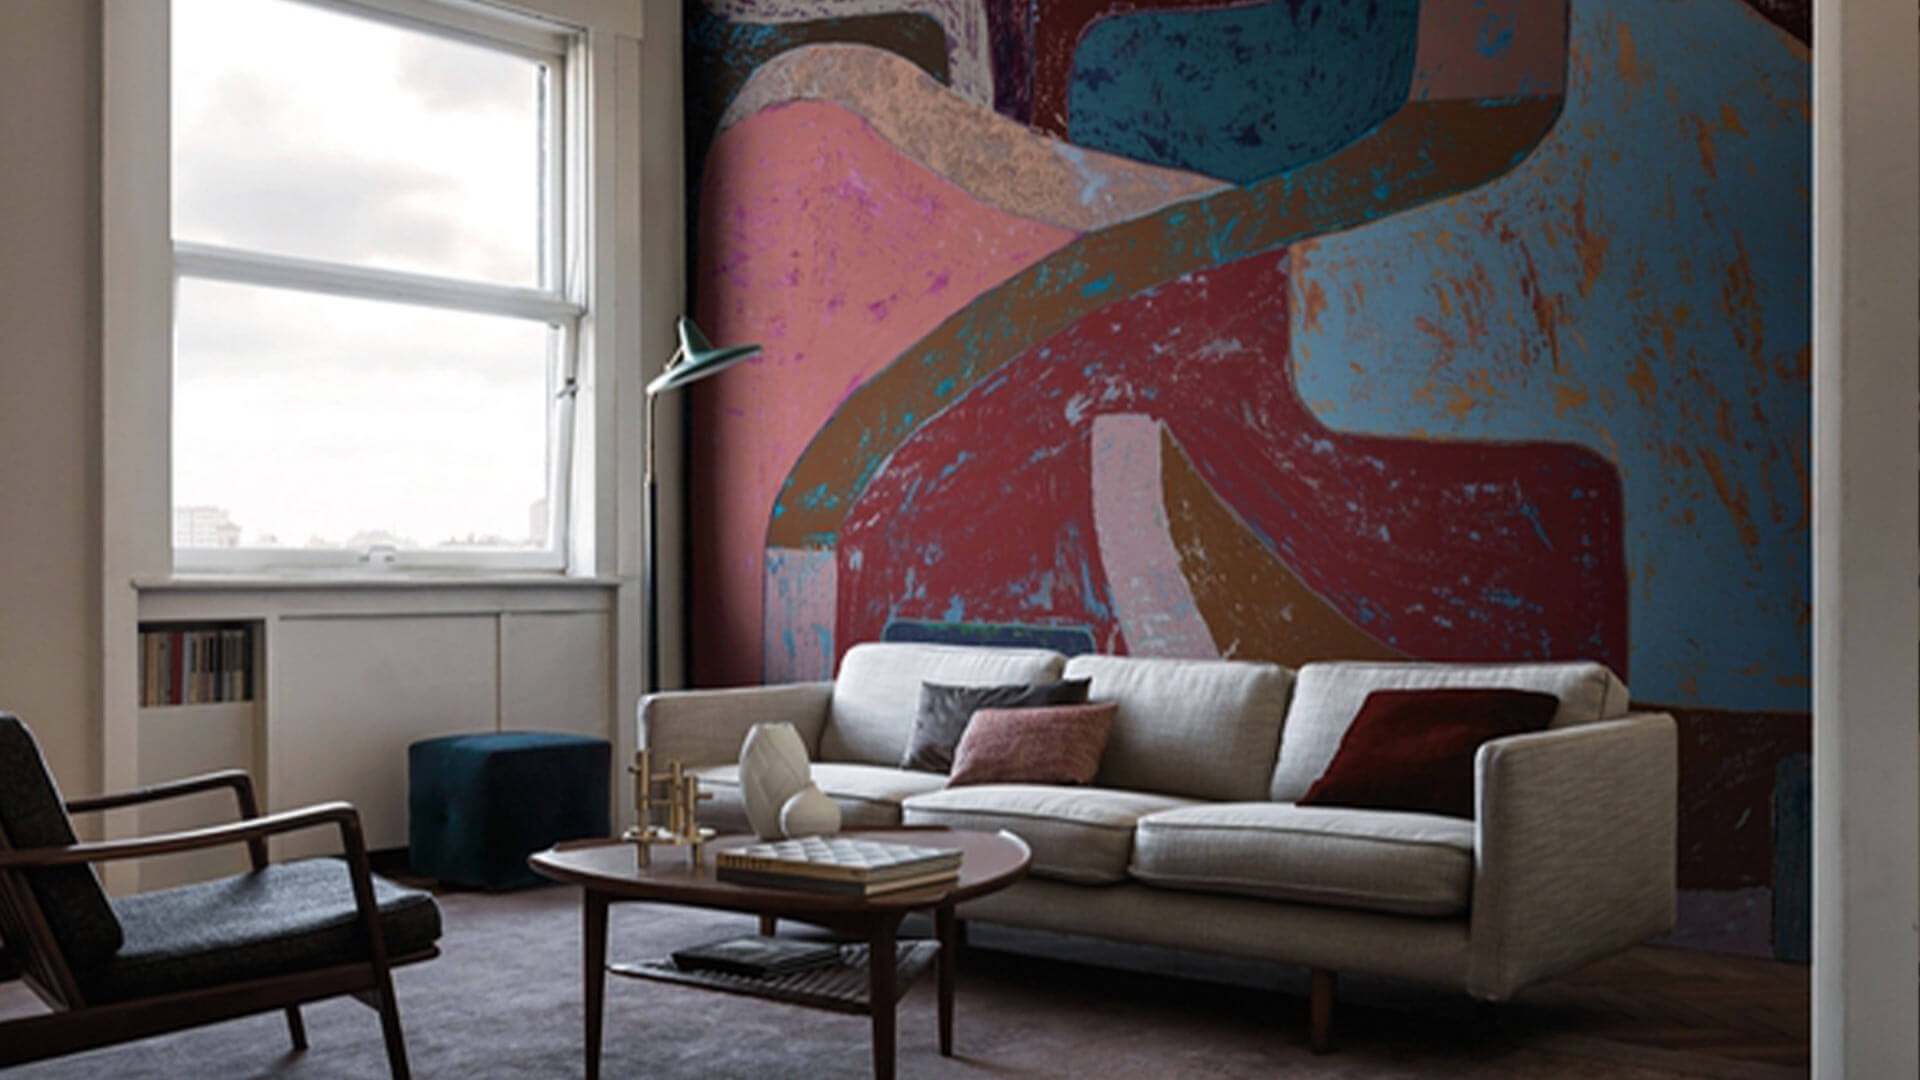 Blog IDW - Wallpaper: creative ideas and proposals for your flat